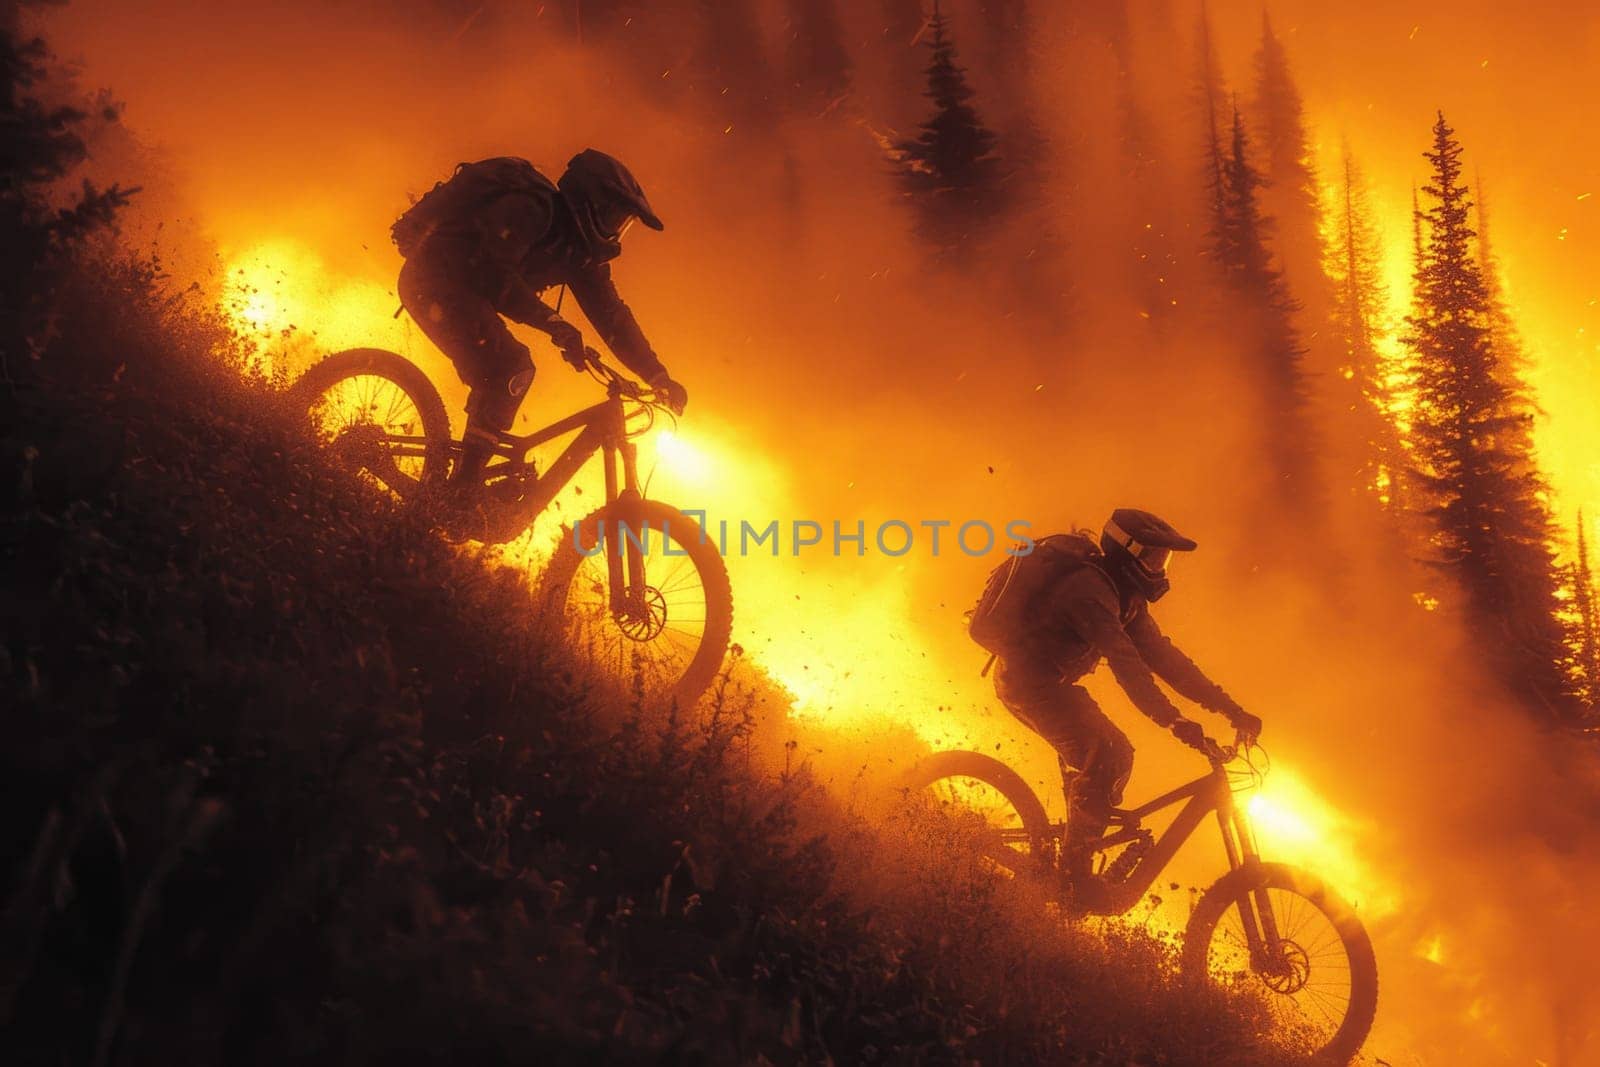 Two mountain bike riders at a mountain bike cross-country competition in the mountains by Lobachad